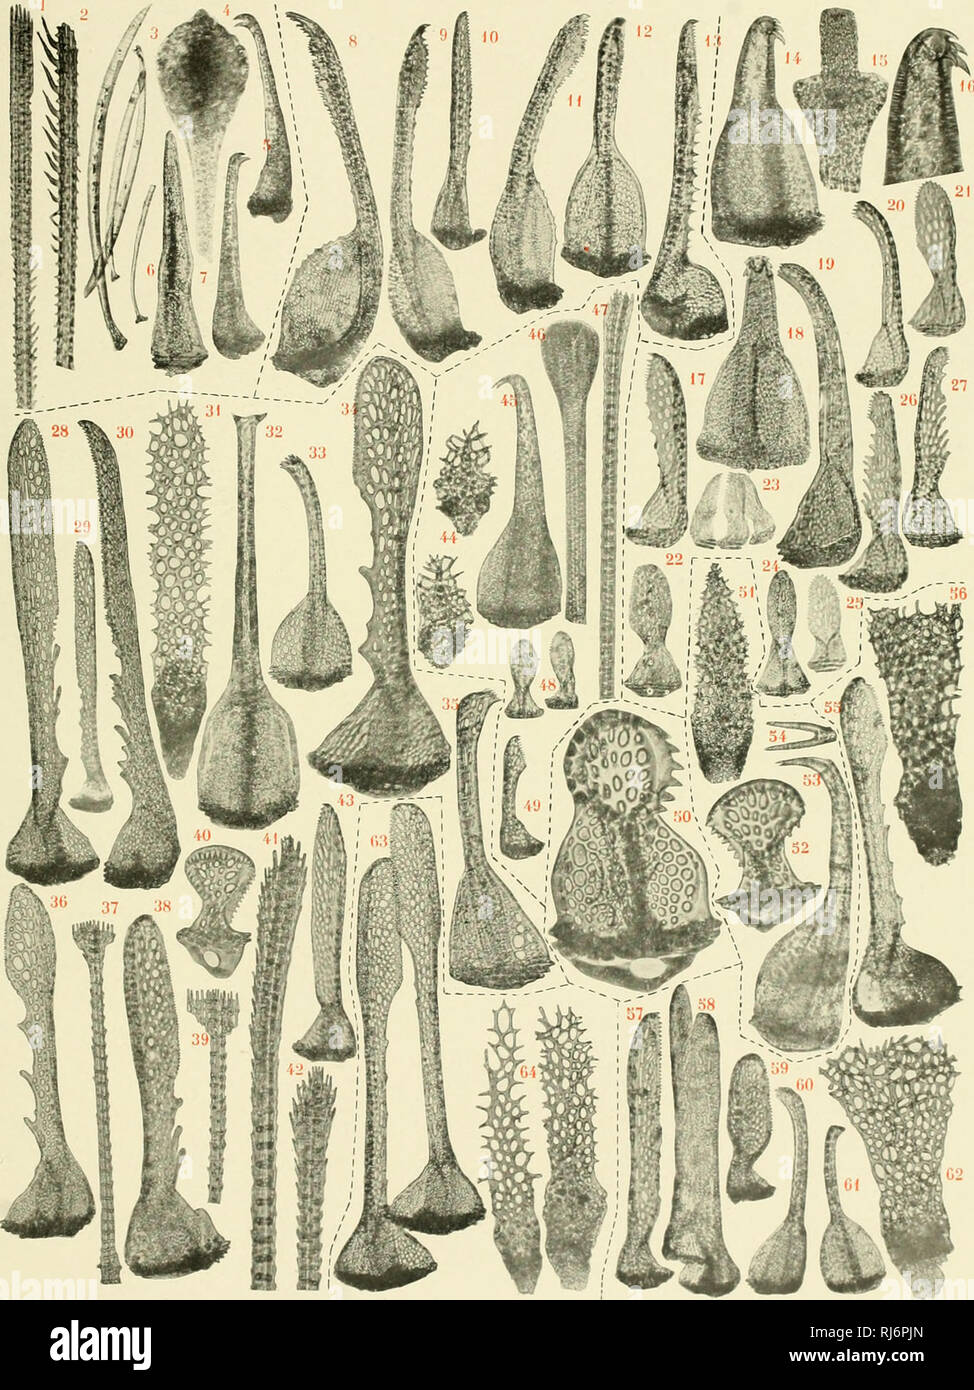 . E?chinides du Muse?e indien a? Calcutta. Echinodermata; Sea urchins. KOIHLER. ECHINIDES. SpAT.v.NGinÉs. l'i. XX. R. Kœhler pliot. S'' Lyonnaise de Pliotoclironiogravure 1-7 PSEUDOMARETIA ALTA. 8-13 MARETIA PLANULATA. Ji-27 PARASTEU OIBBERULUS. 28-43 BRISSOPSIS OLDHA.MI. 44-49 PRYMNASTER ANGULATUS. 50 BRISSOPSIS DUPLEX. 51-54 BRISS(3PSIS LUZONKLV. 55-62 BRISSOPSIS PARALLELA. 63 et 64 BRISSOPSIS BEXGALENSIS.. Please note that these images are extracted from scanned page images that may have been digitally enhanced for readability - coloration and appearance of these illustrations may not perfe Stock Photo